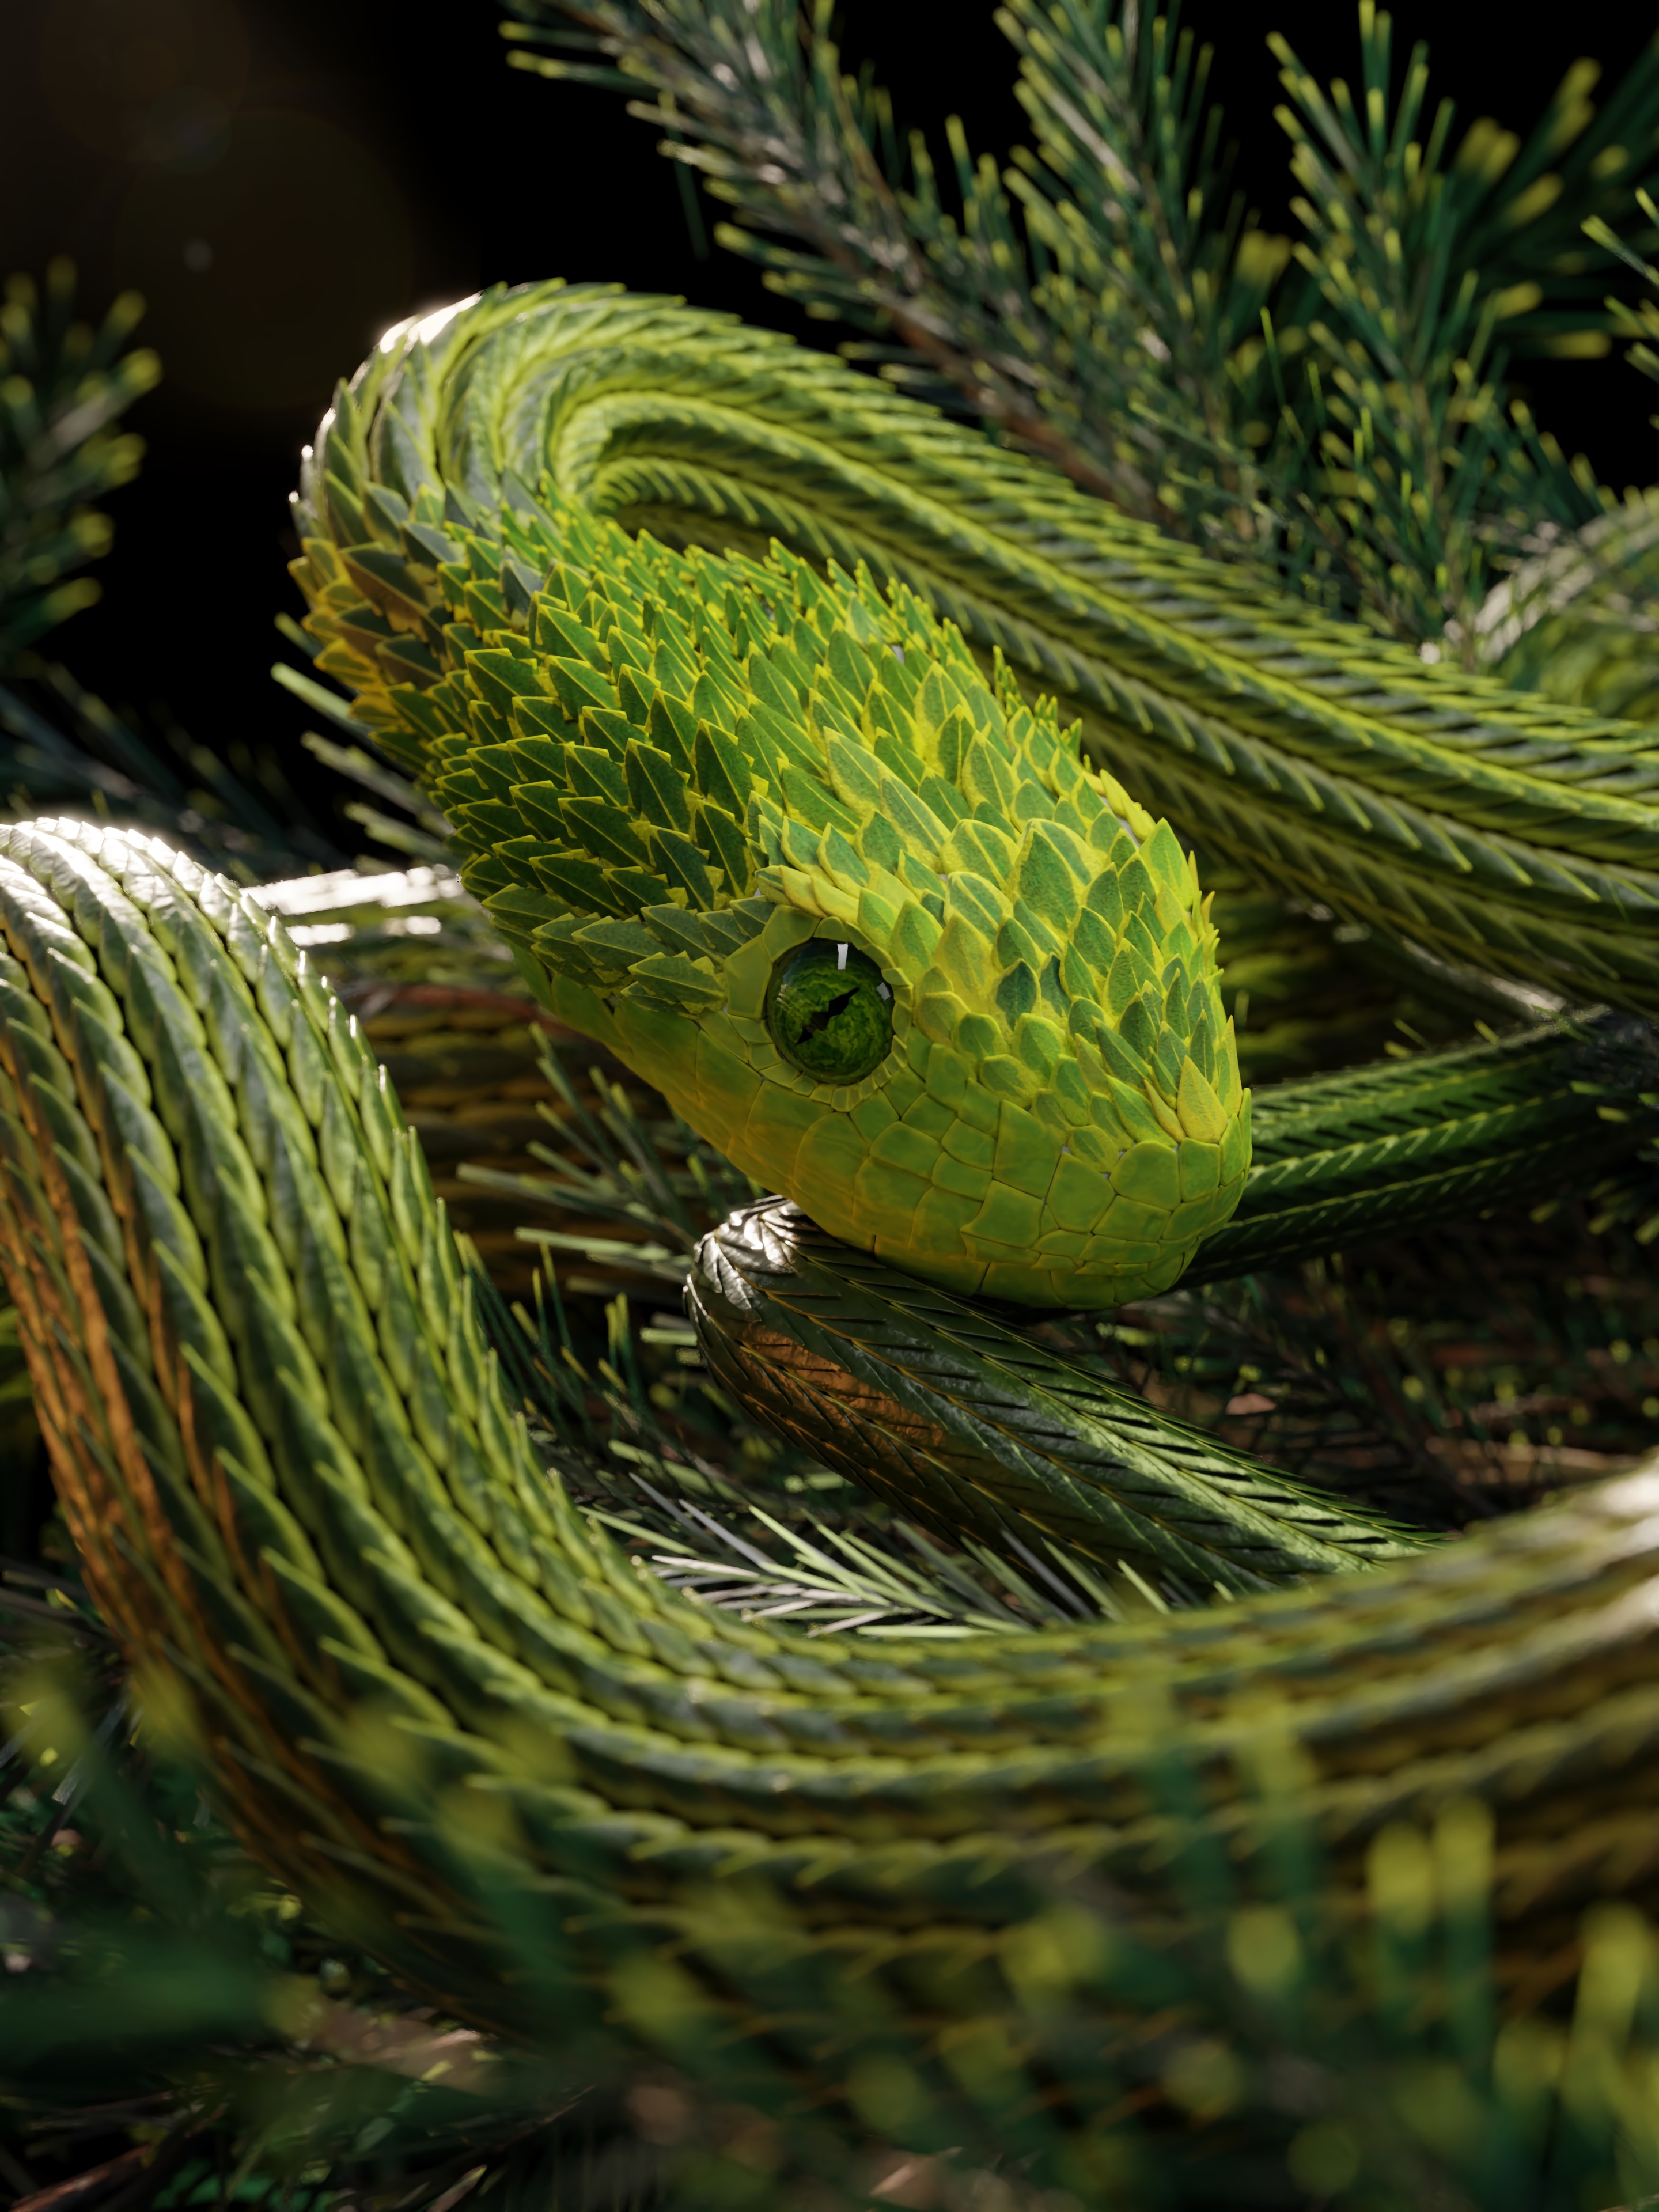 3d, snake, green, reptile, scales, scale